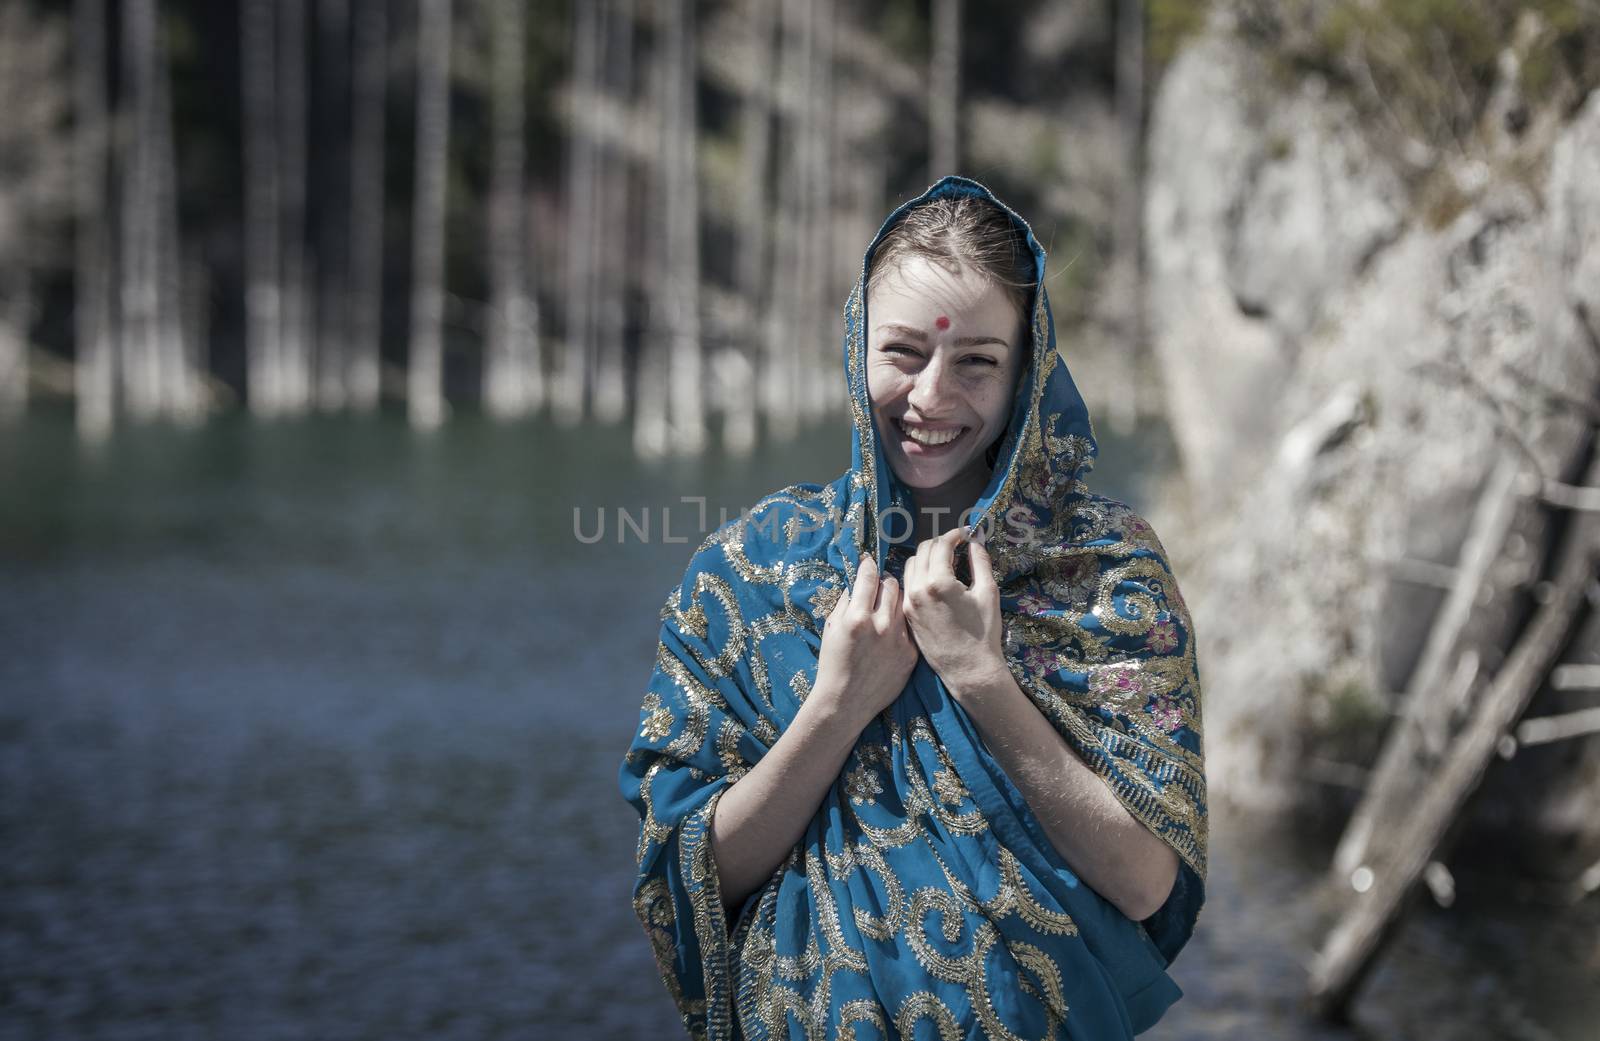 The girl of the European appearance laugh and poses in the Indian sari at Kaindy lake